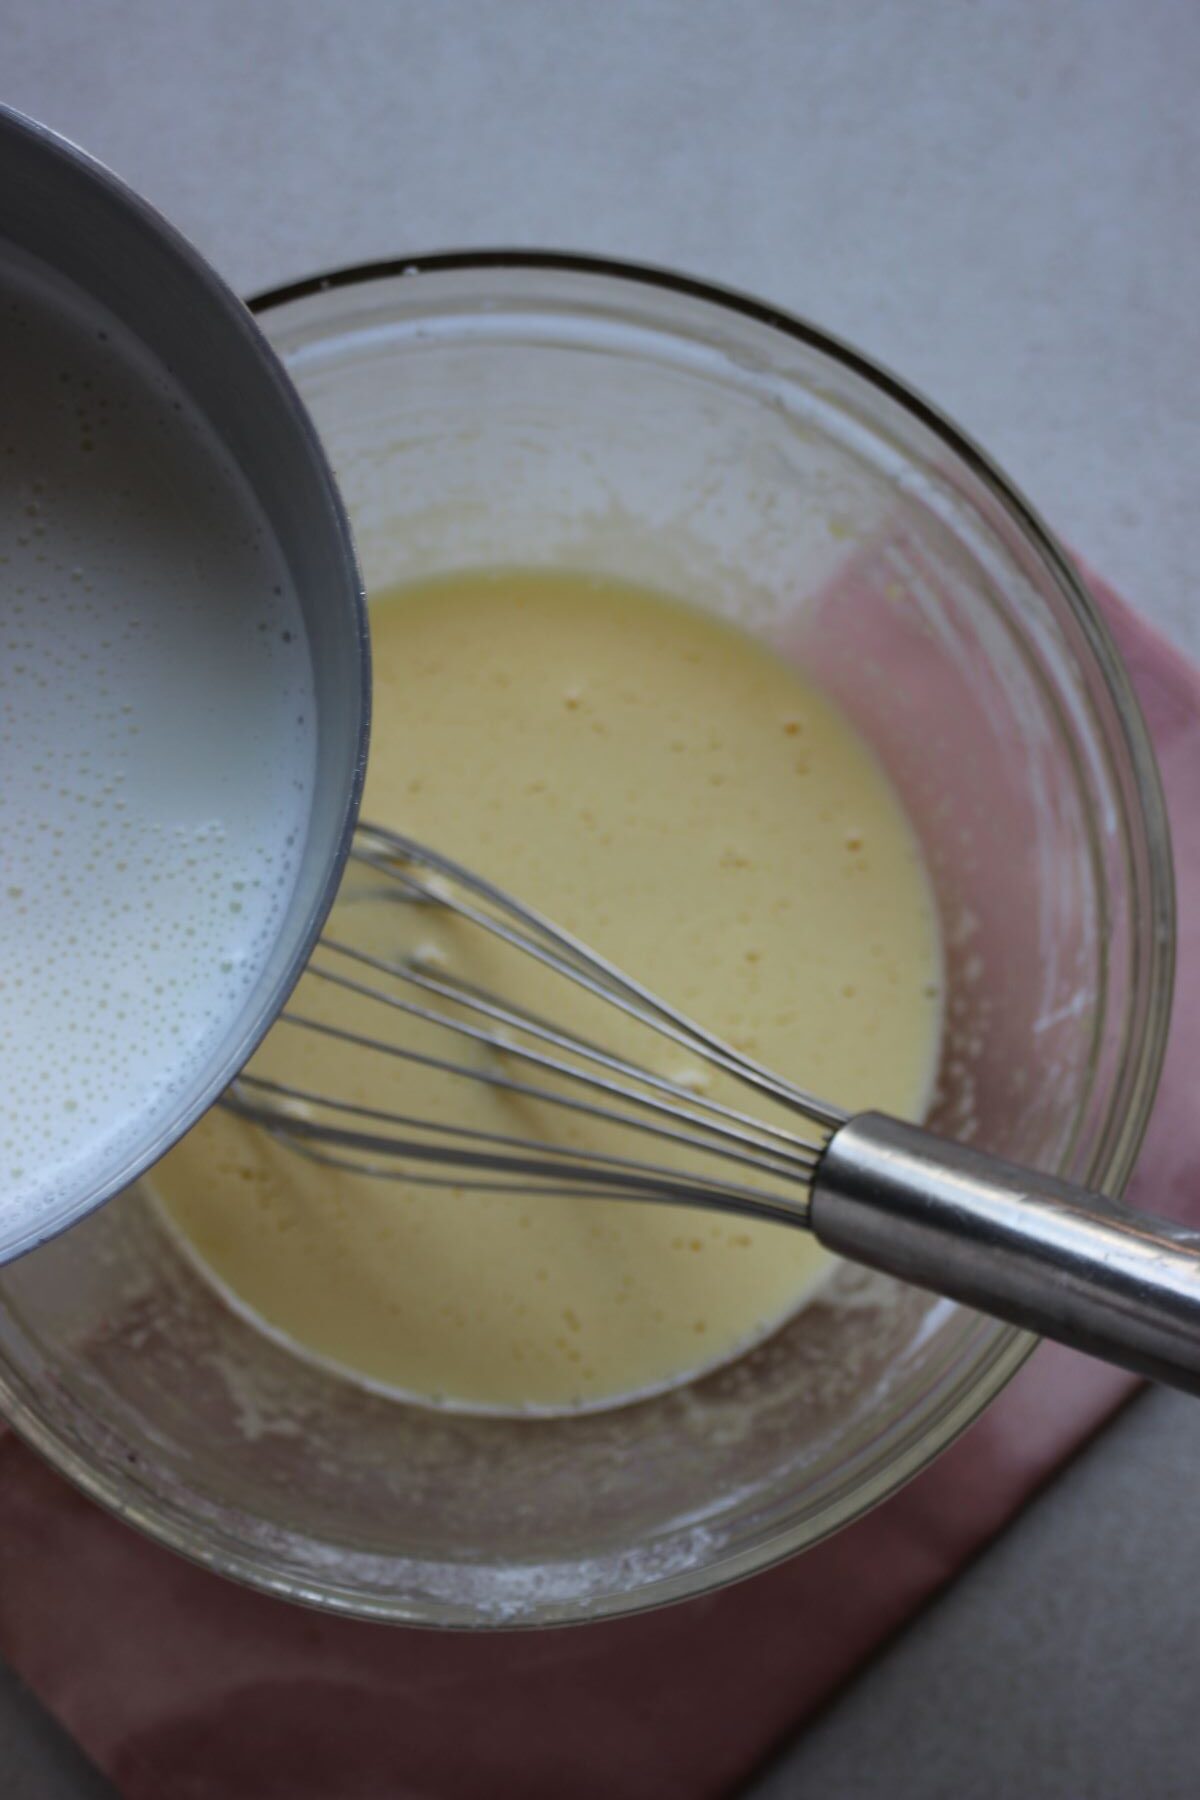 Saucepan with milk is about to be poured into a glass bowl with a liquid.